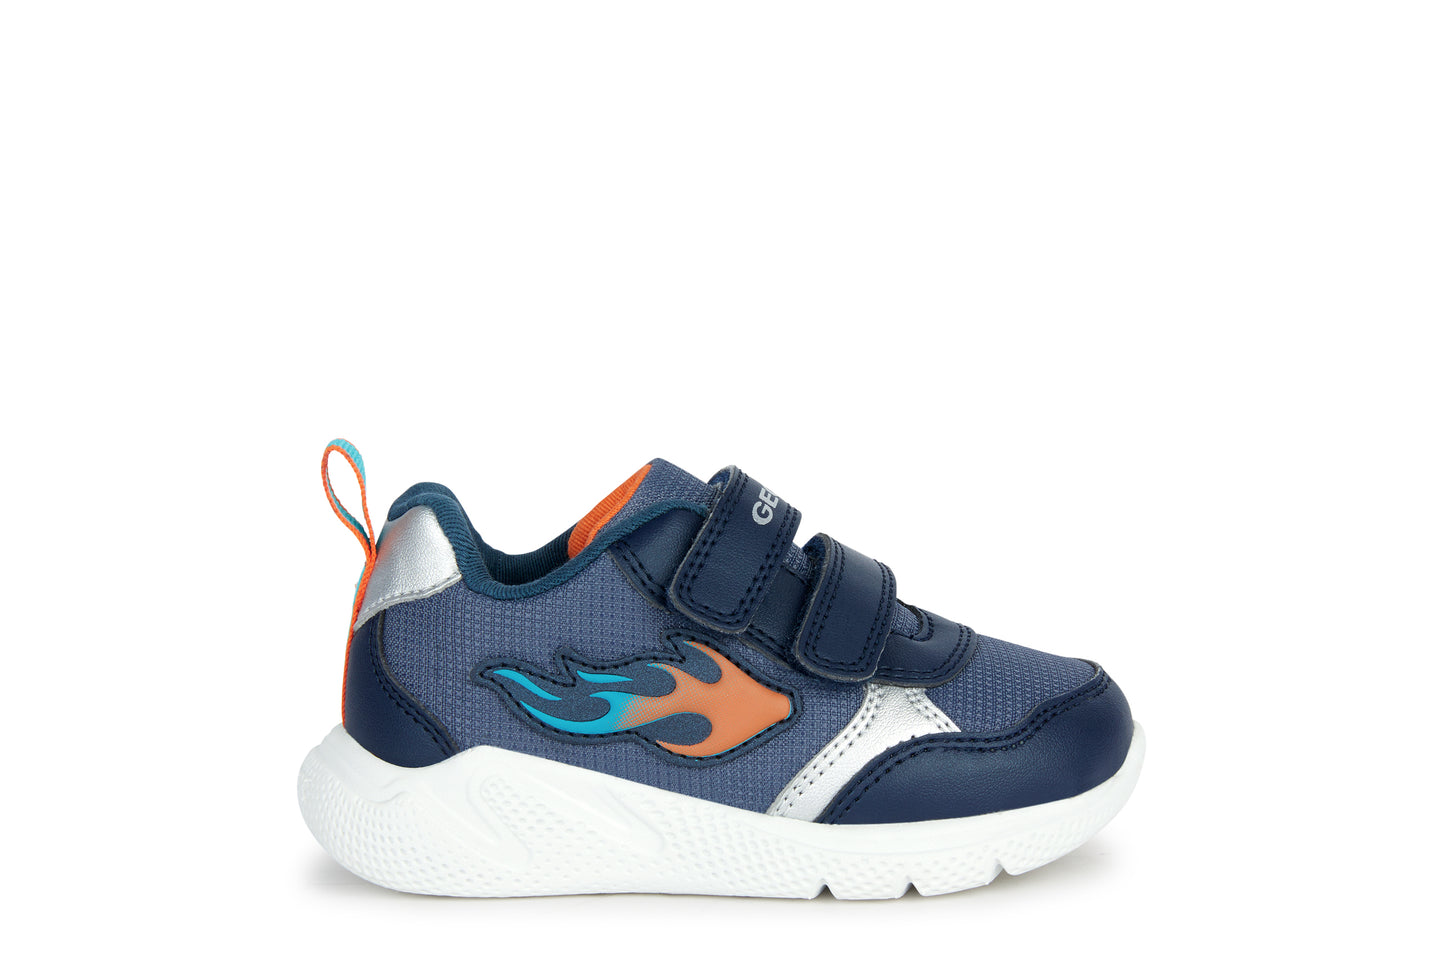 A boys trainer by Geox, style Sprintye, in navy and orange with double velcro fastening. Right side view.